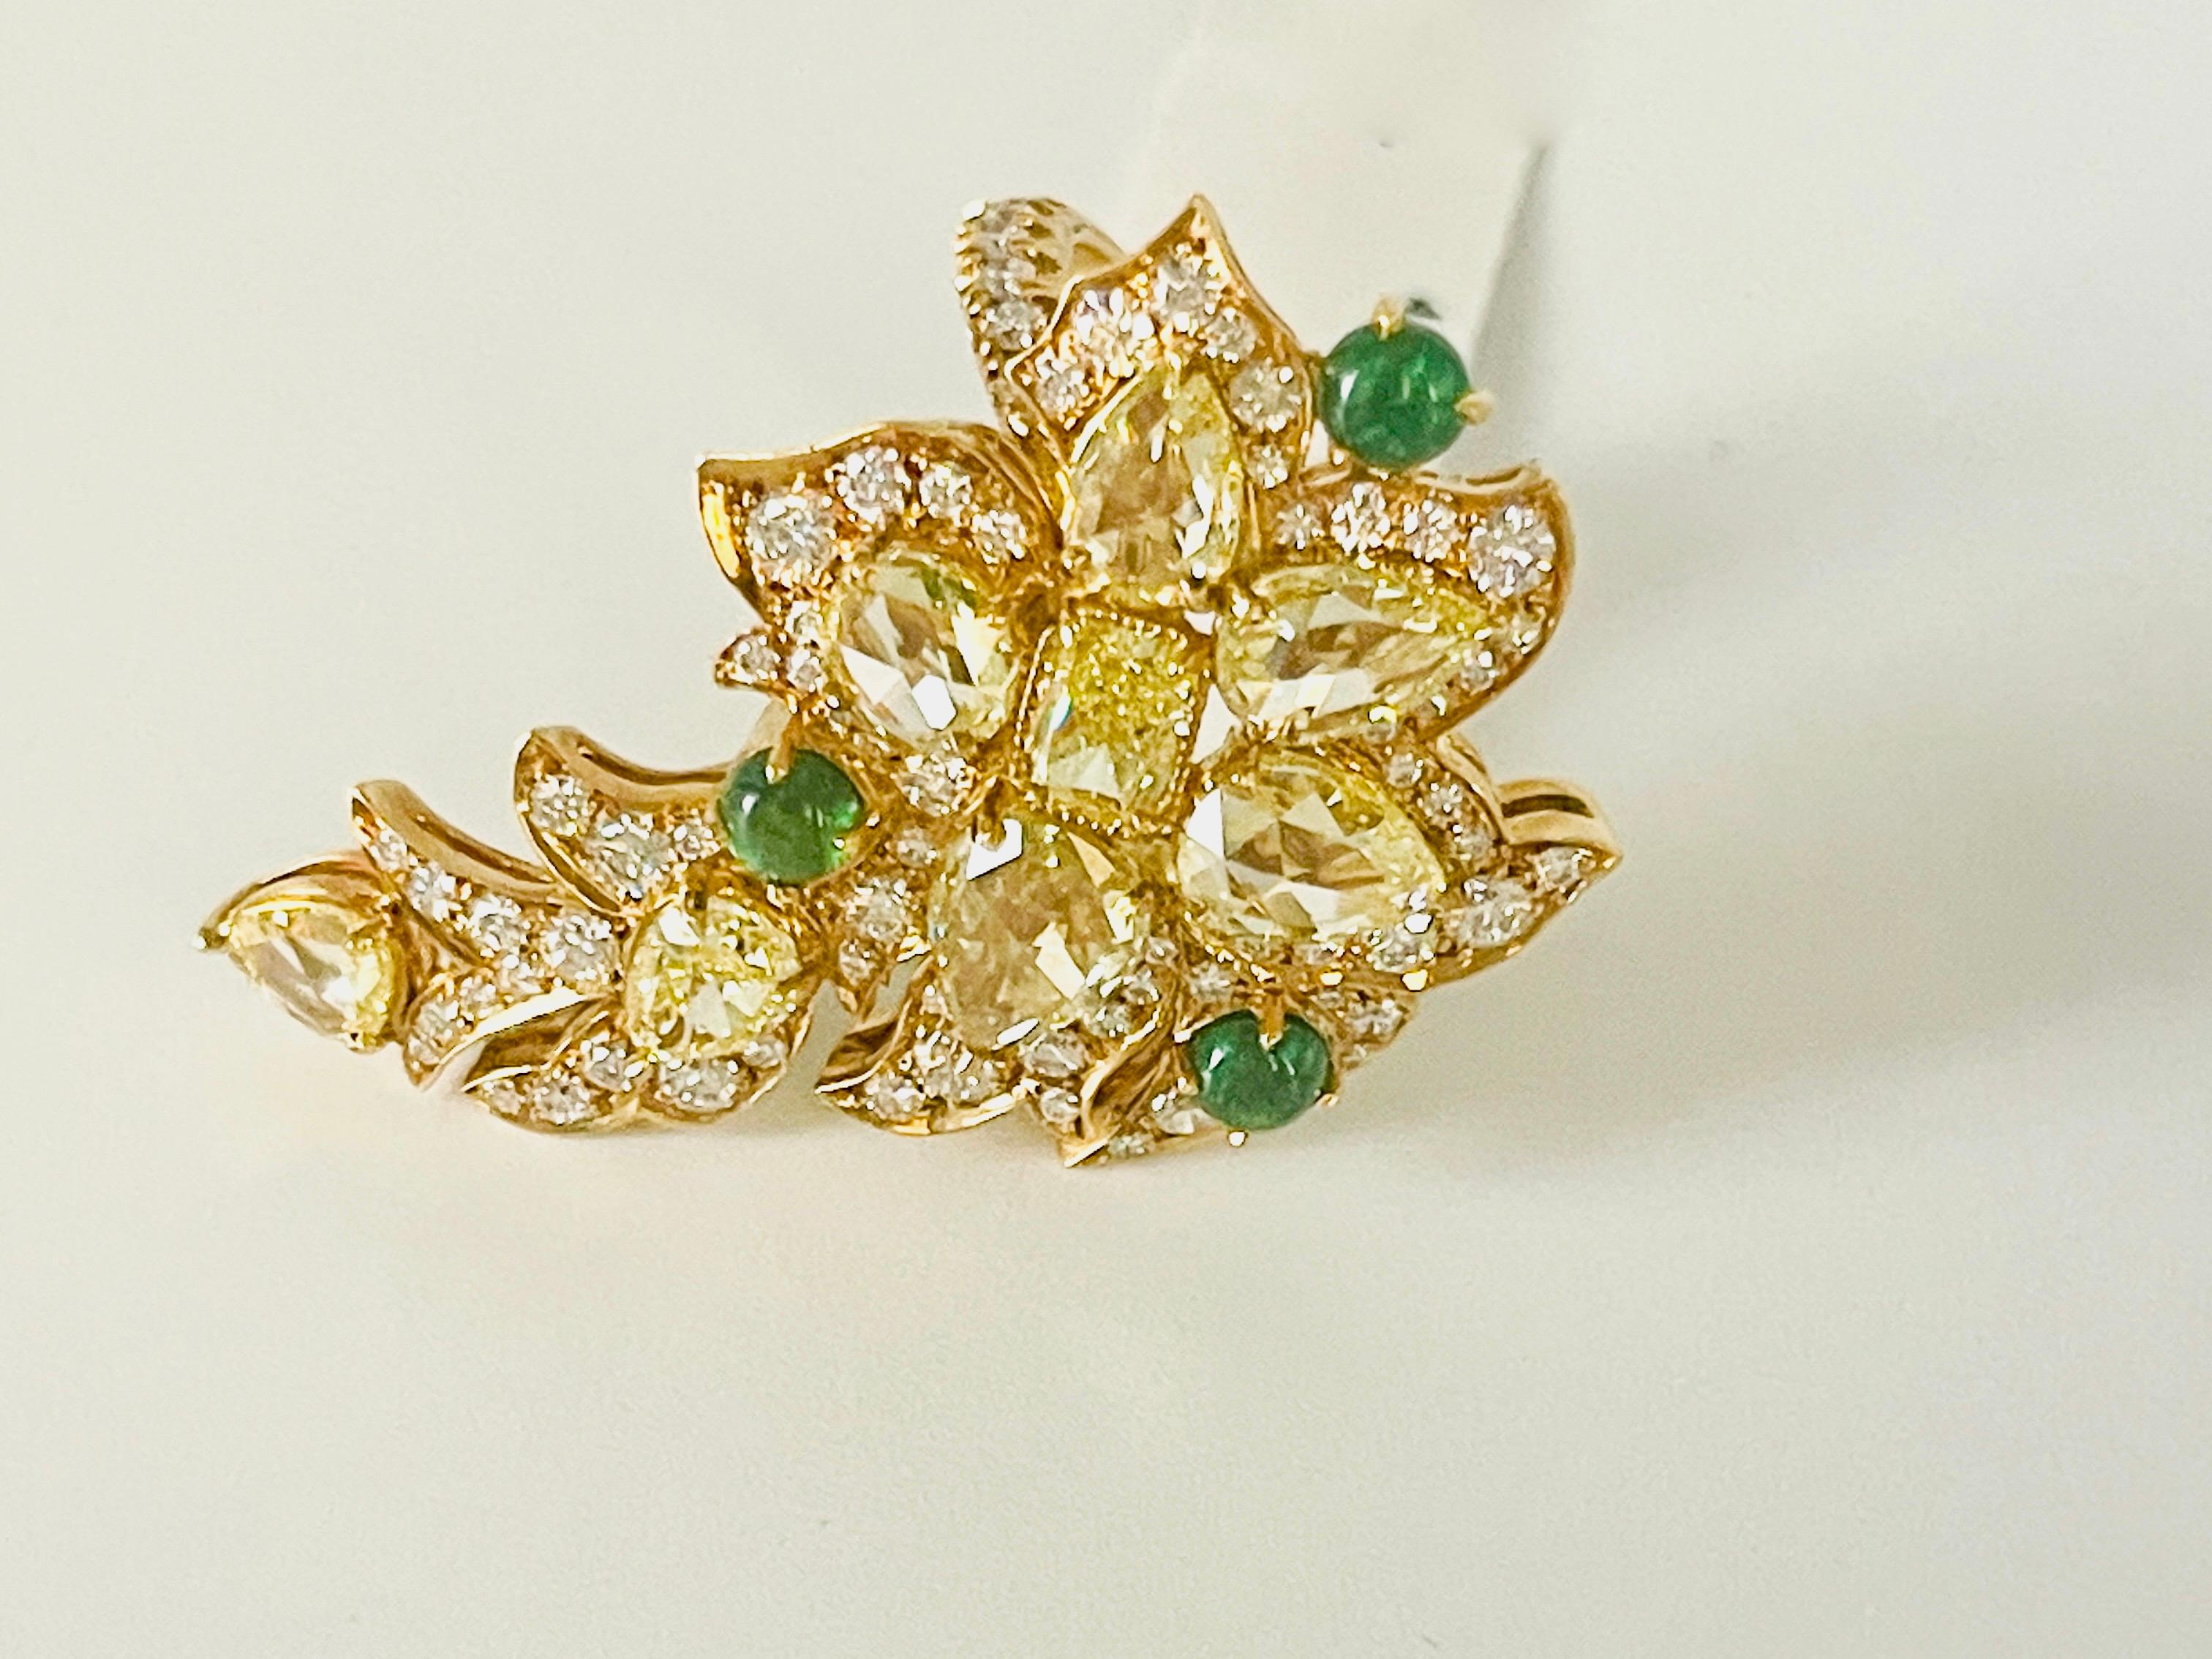 Rose Cut 6 Carat Yellow Diamonds, Emerald and diamonds Cluster Ring Set in 18k Gold. For Sale